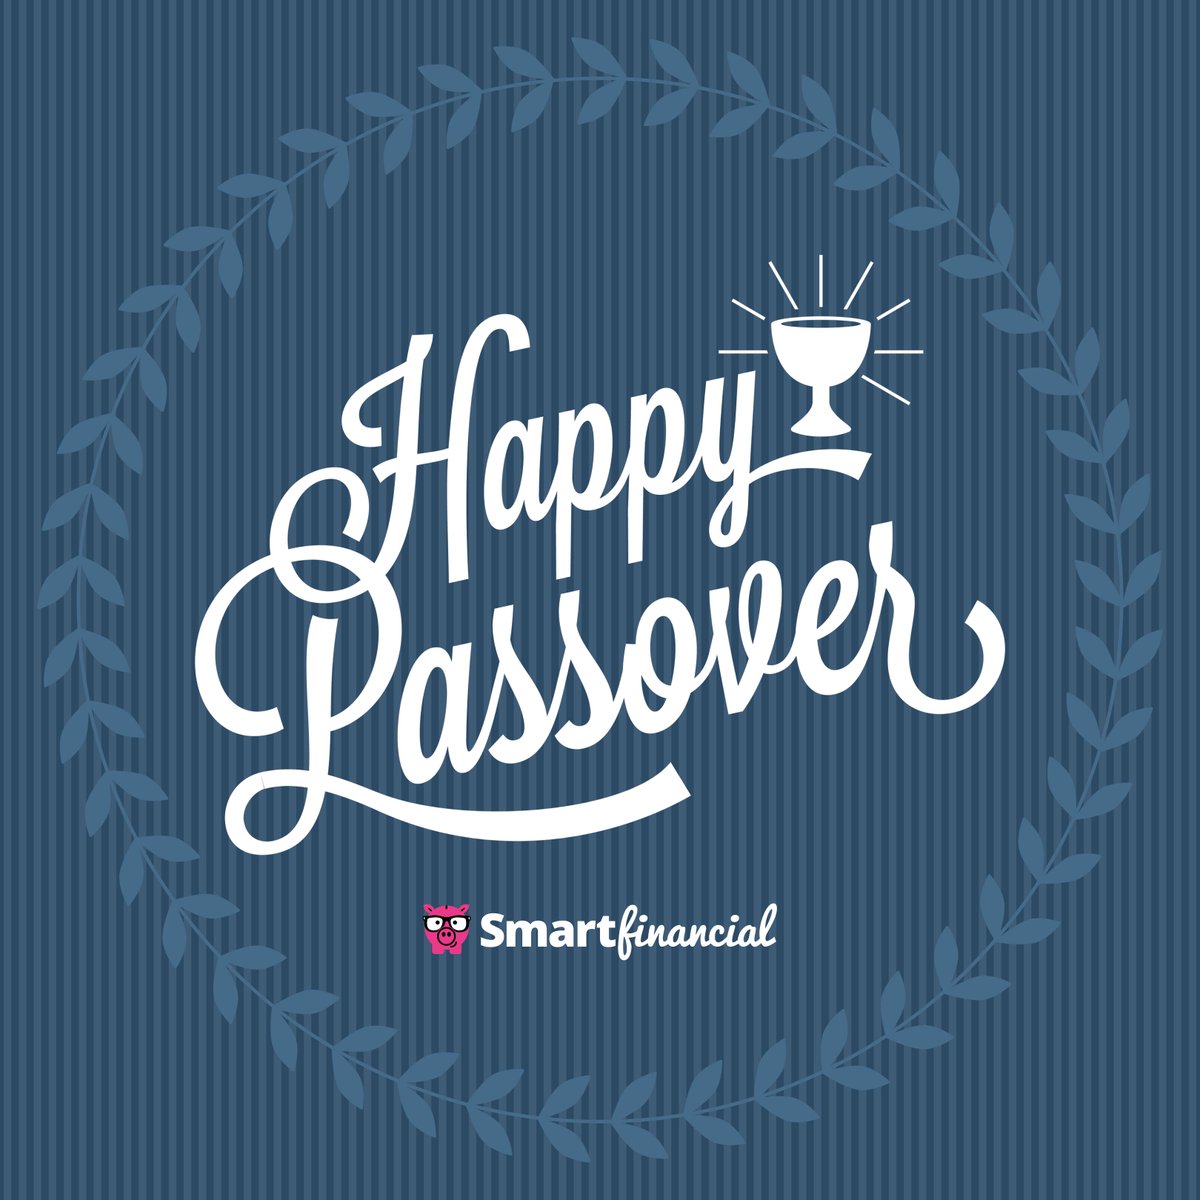 Happy Passover, From the SmartFinancial Family to Yours